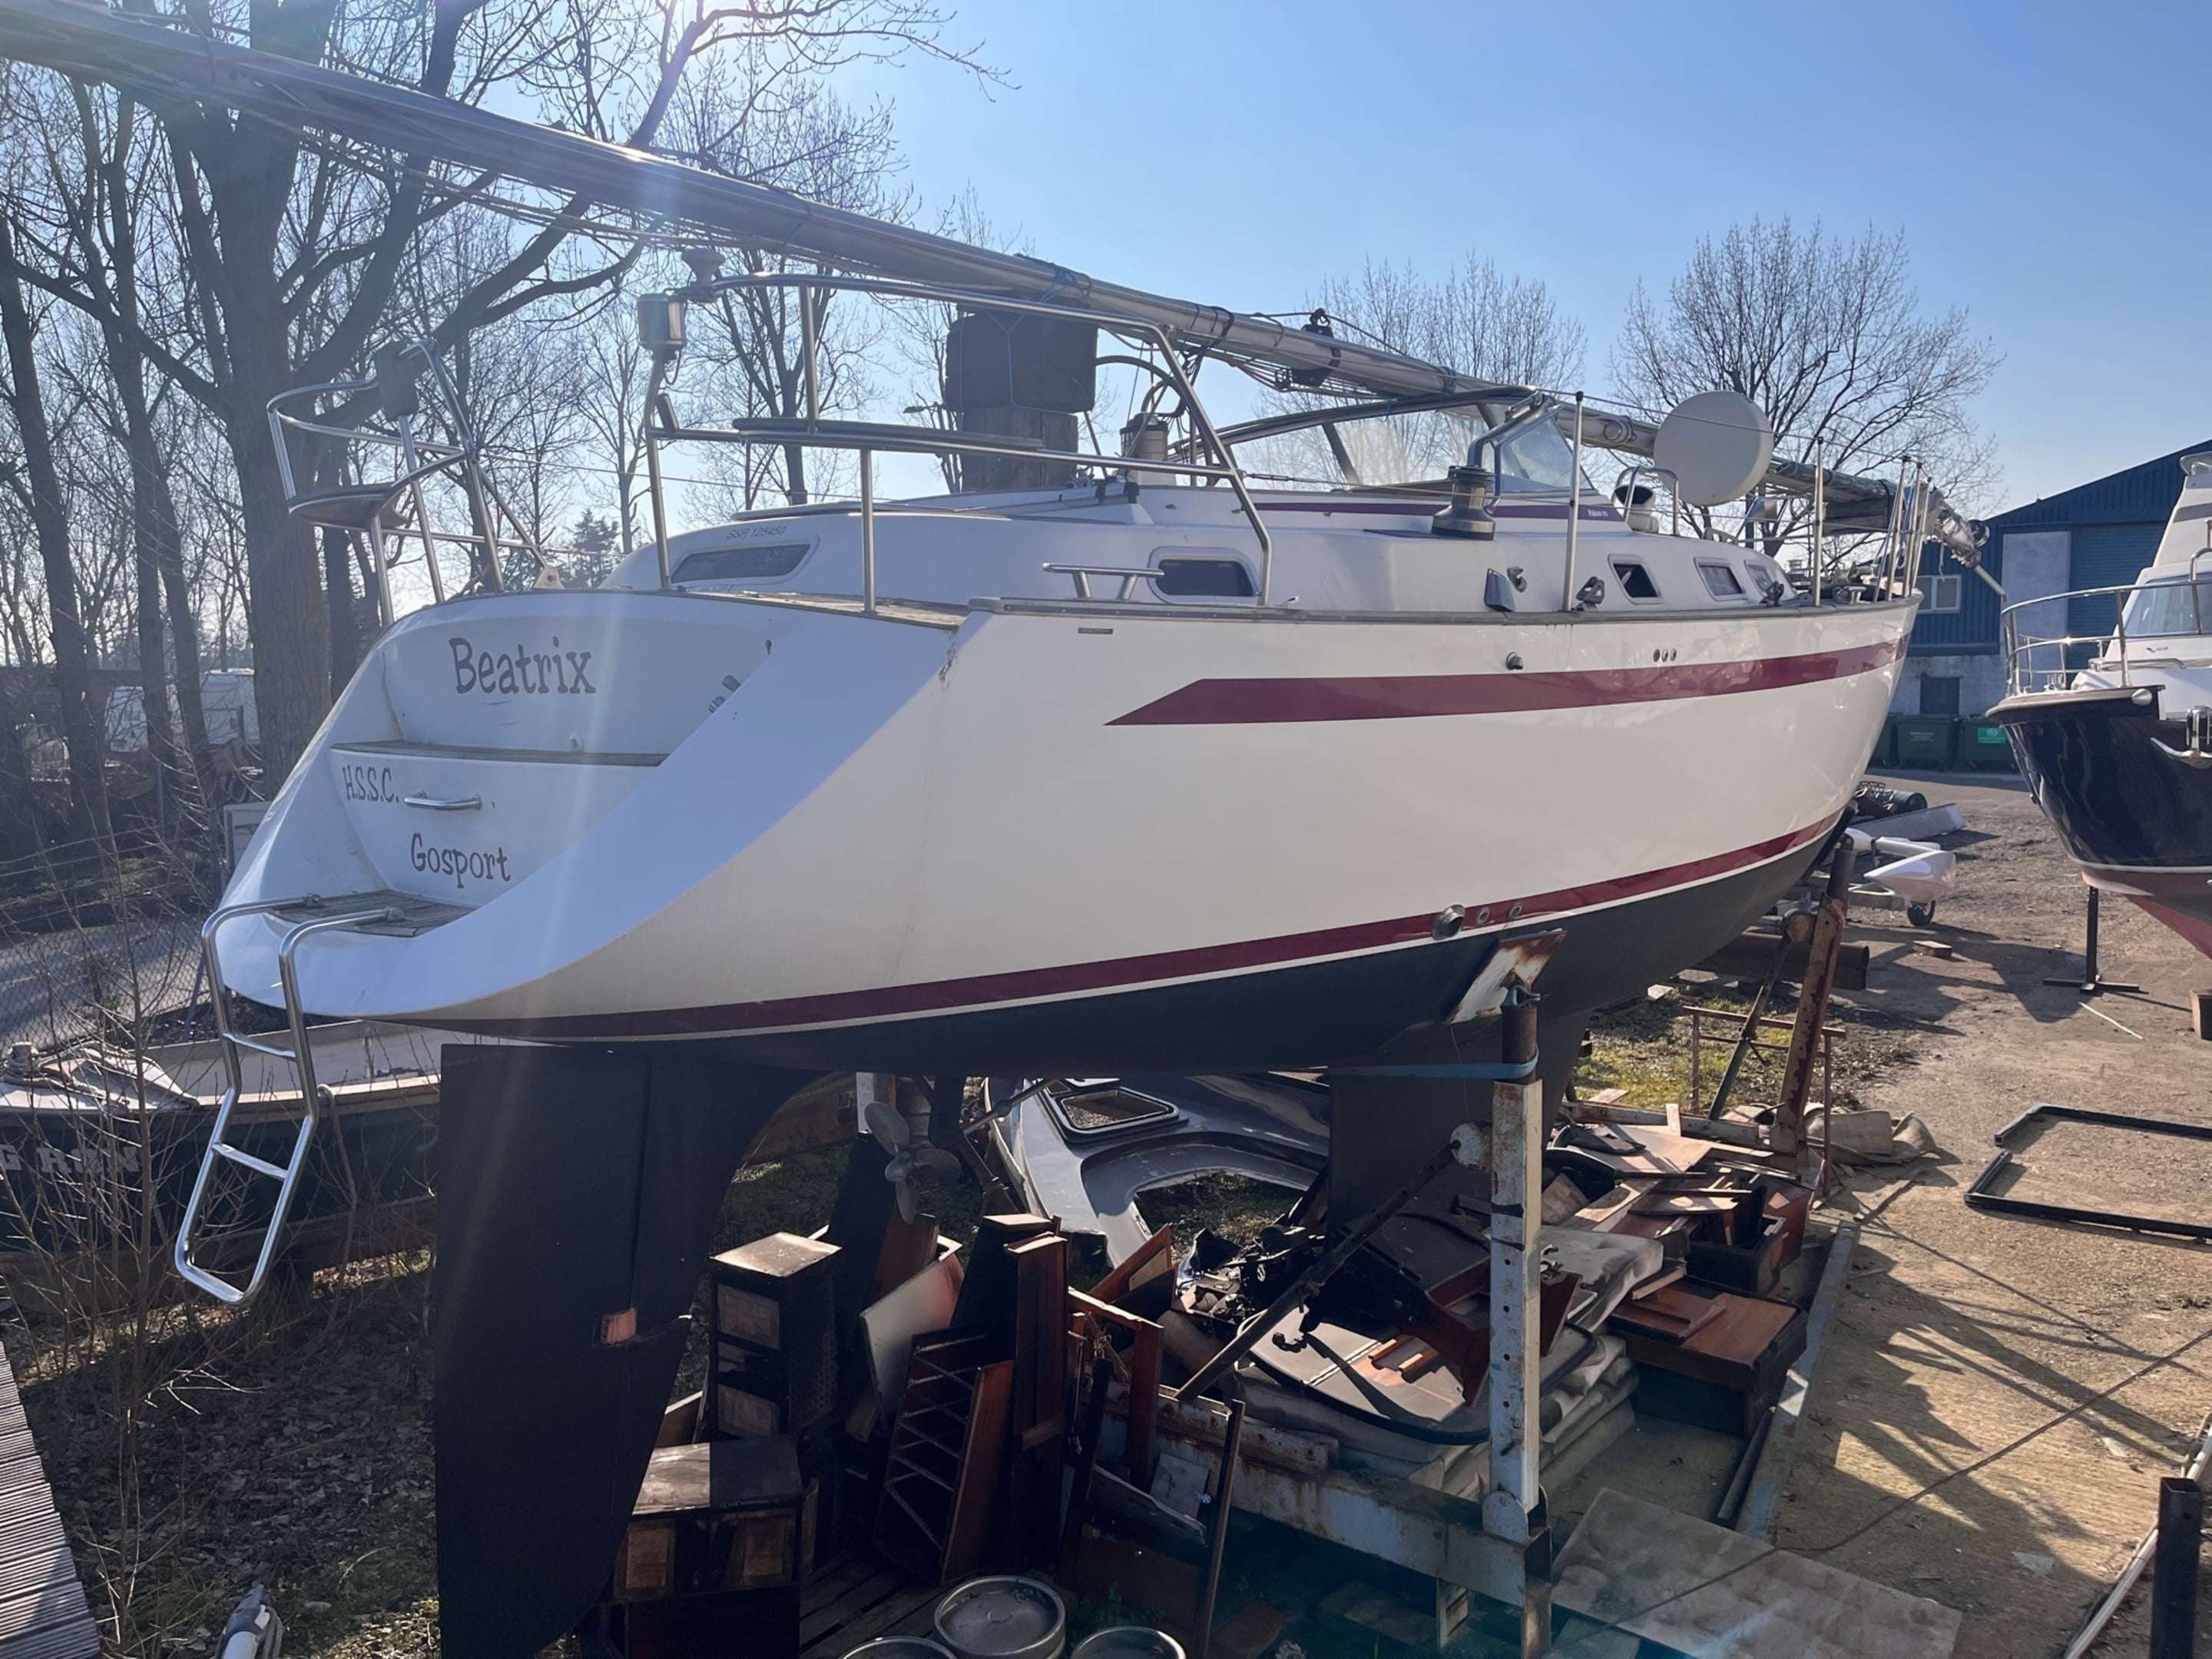 salvage yachts for sale uk